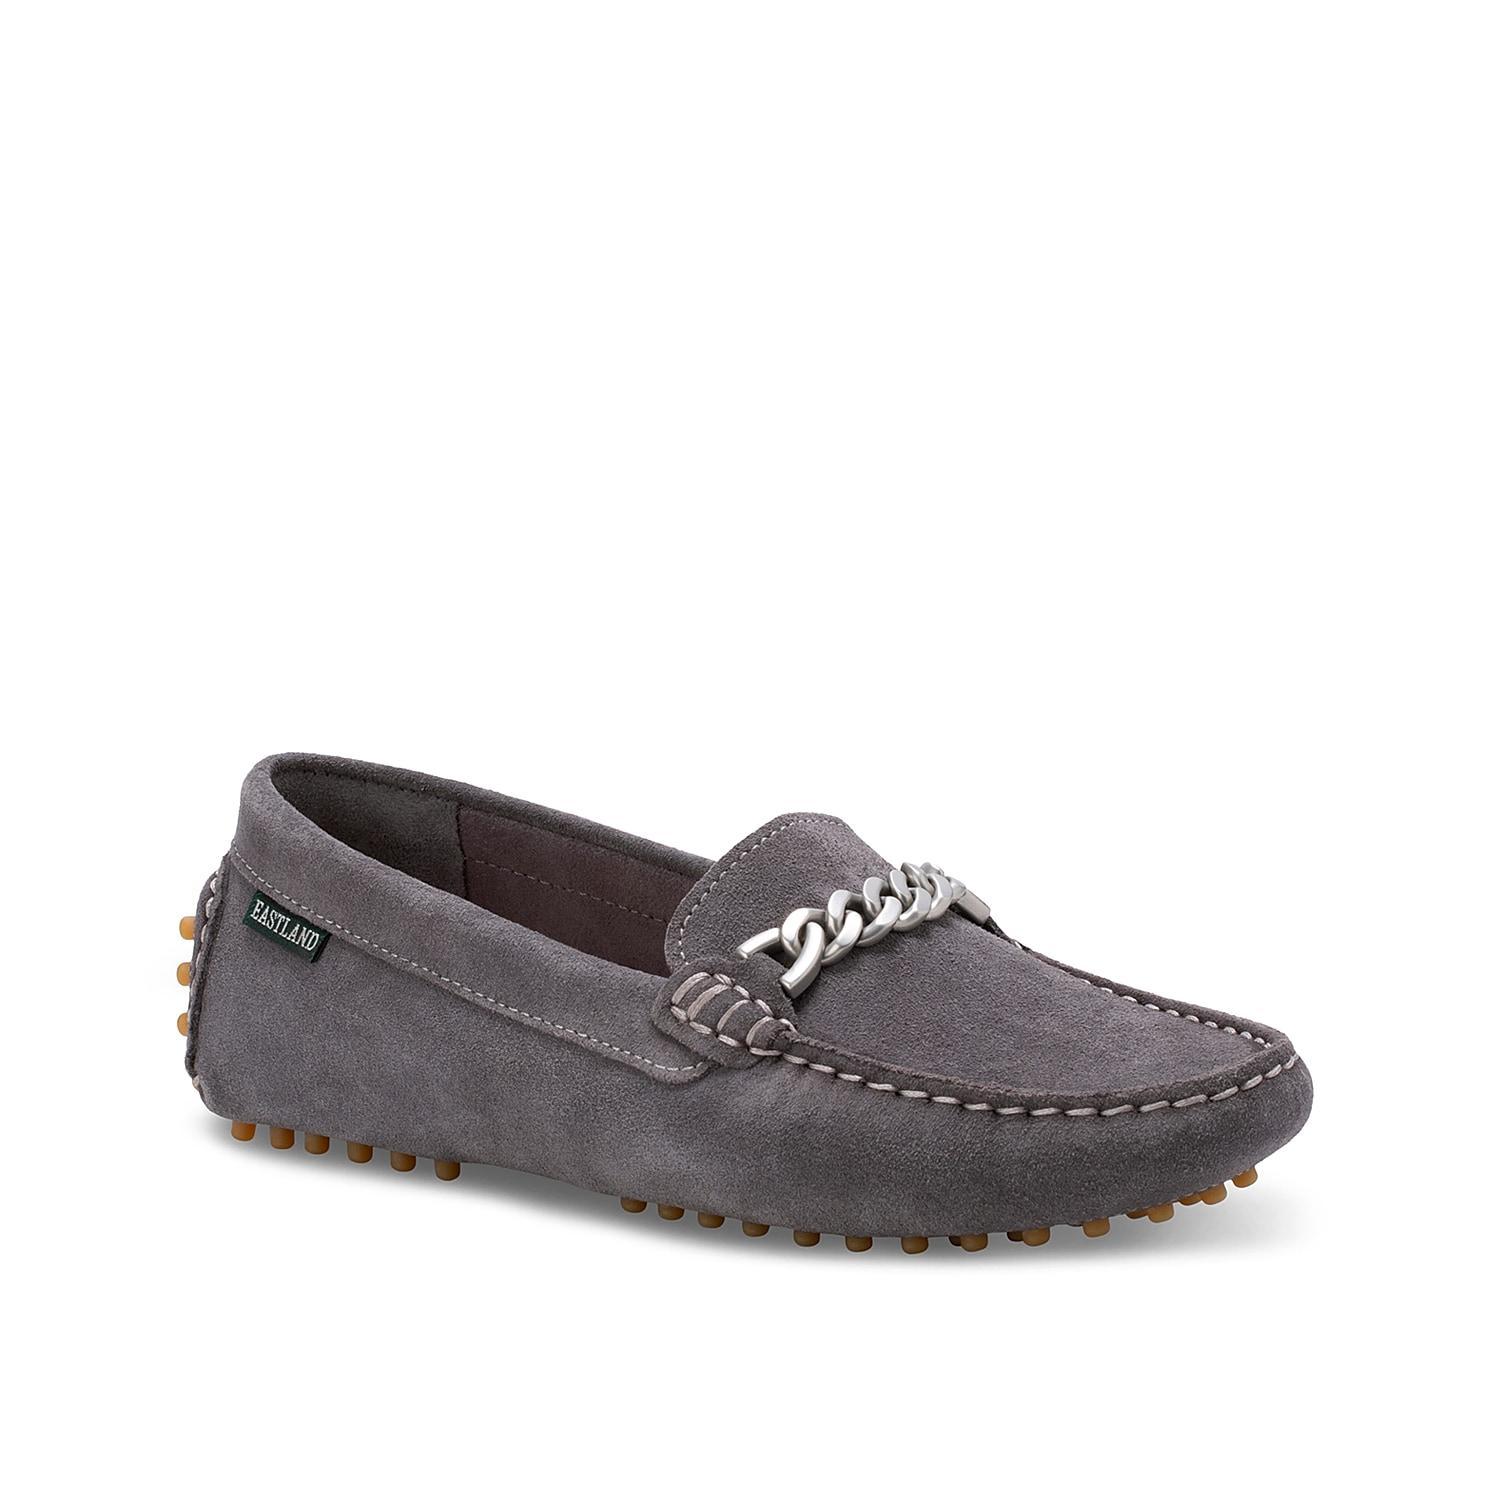 Eastland Sawgrass Womens Loafers Beig/Green Product Image